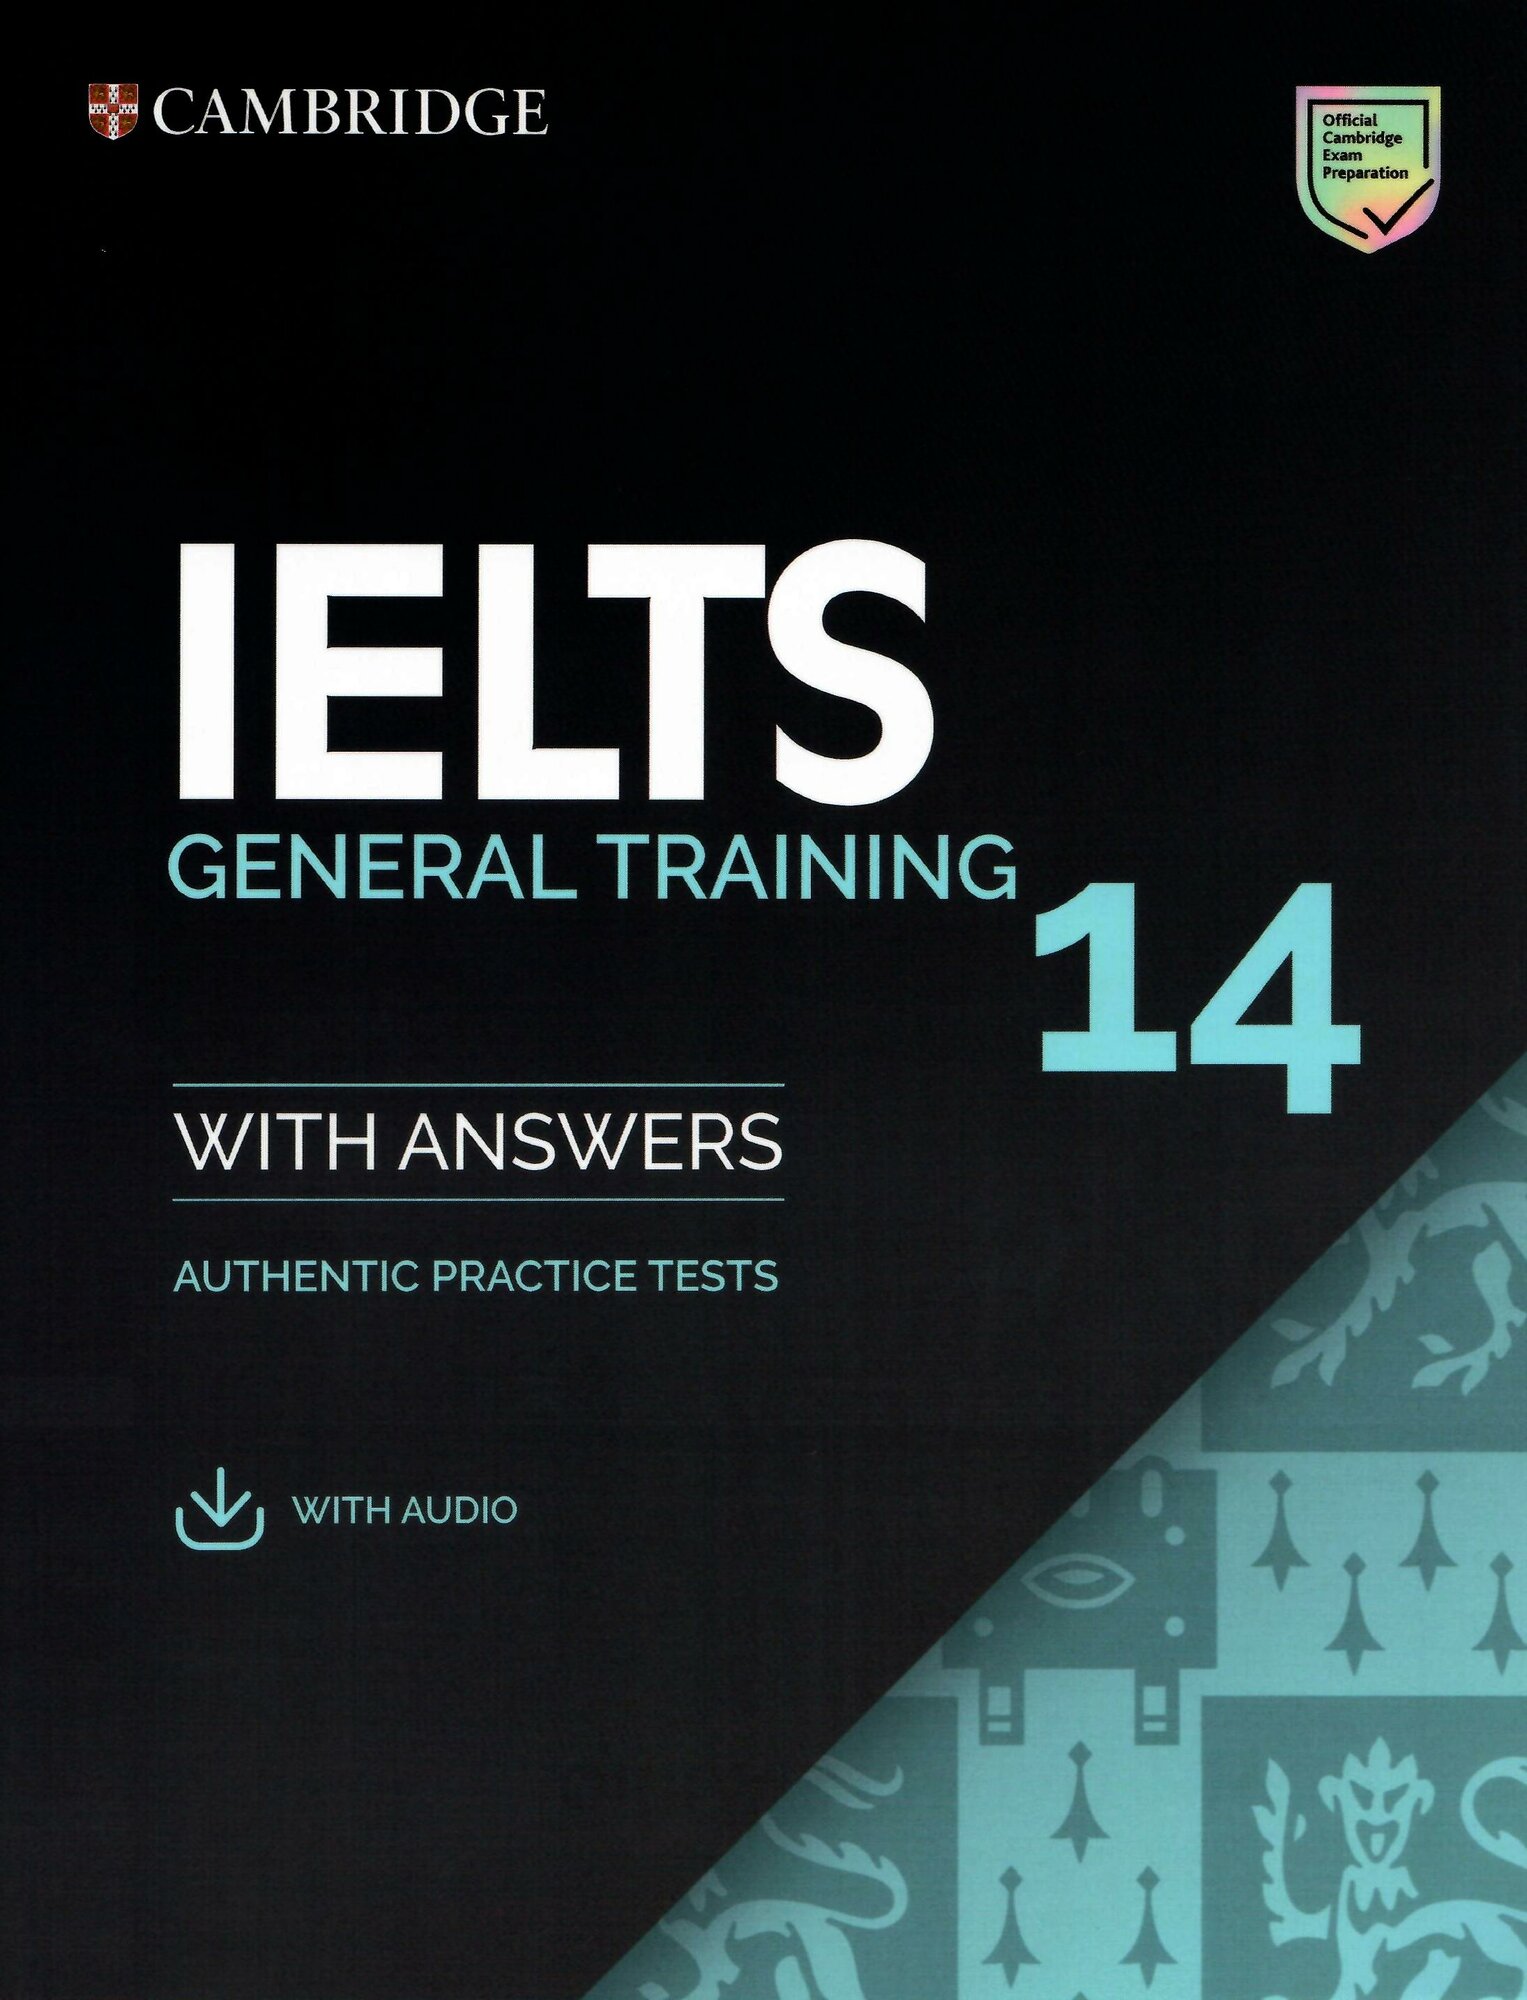 Cambridge IELTS 14 General Training Student's Book with Answers with Audio